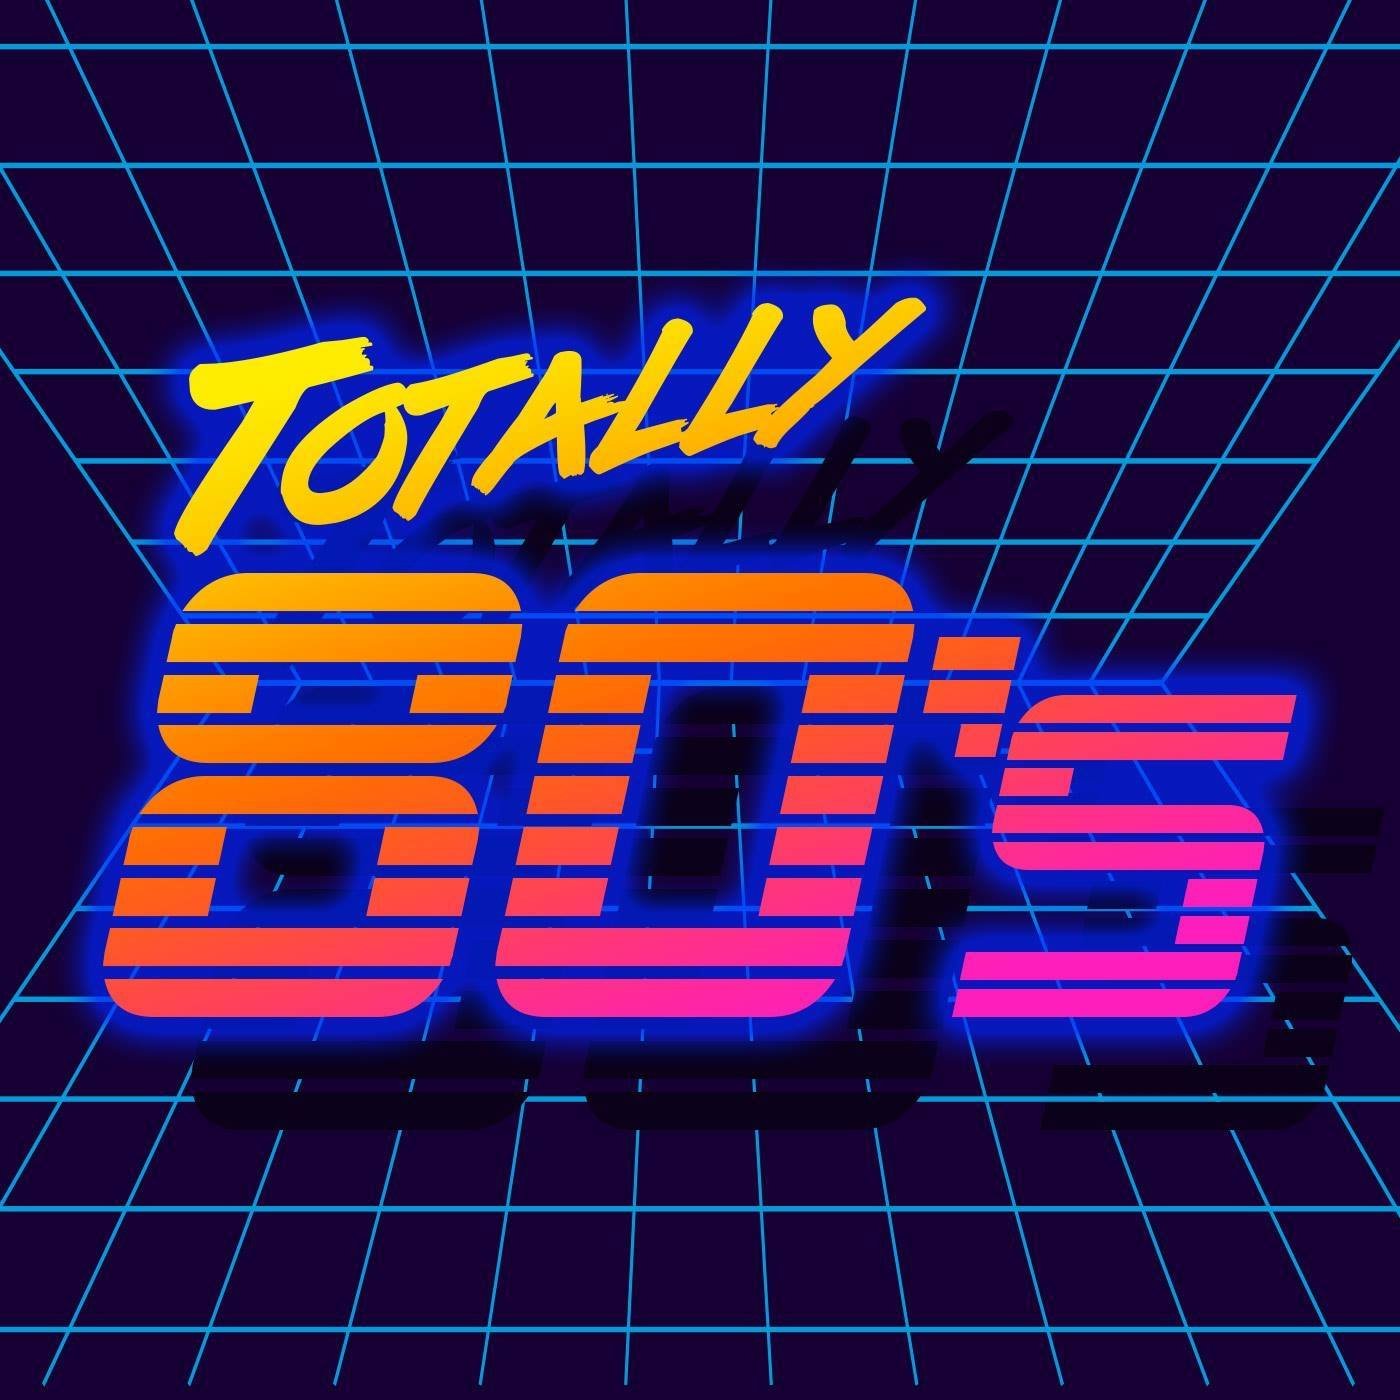 Totally 80s